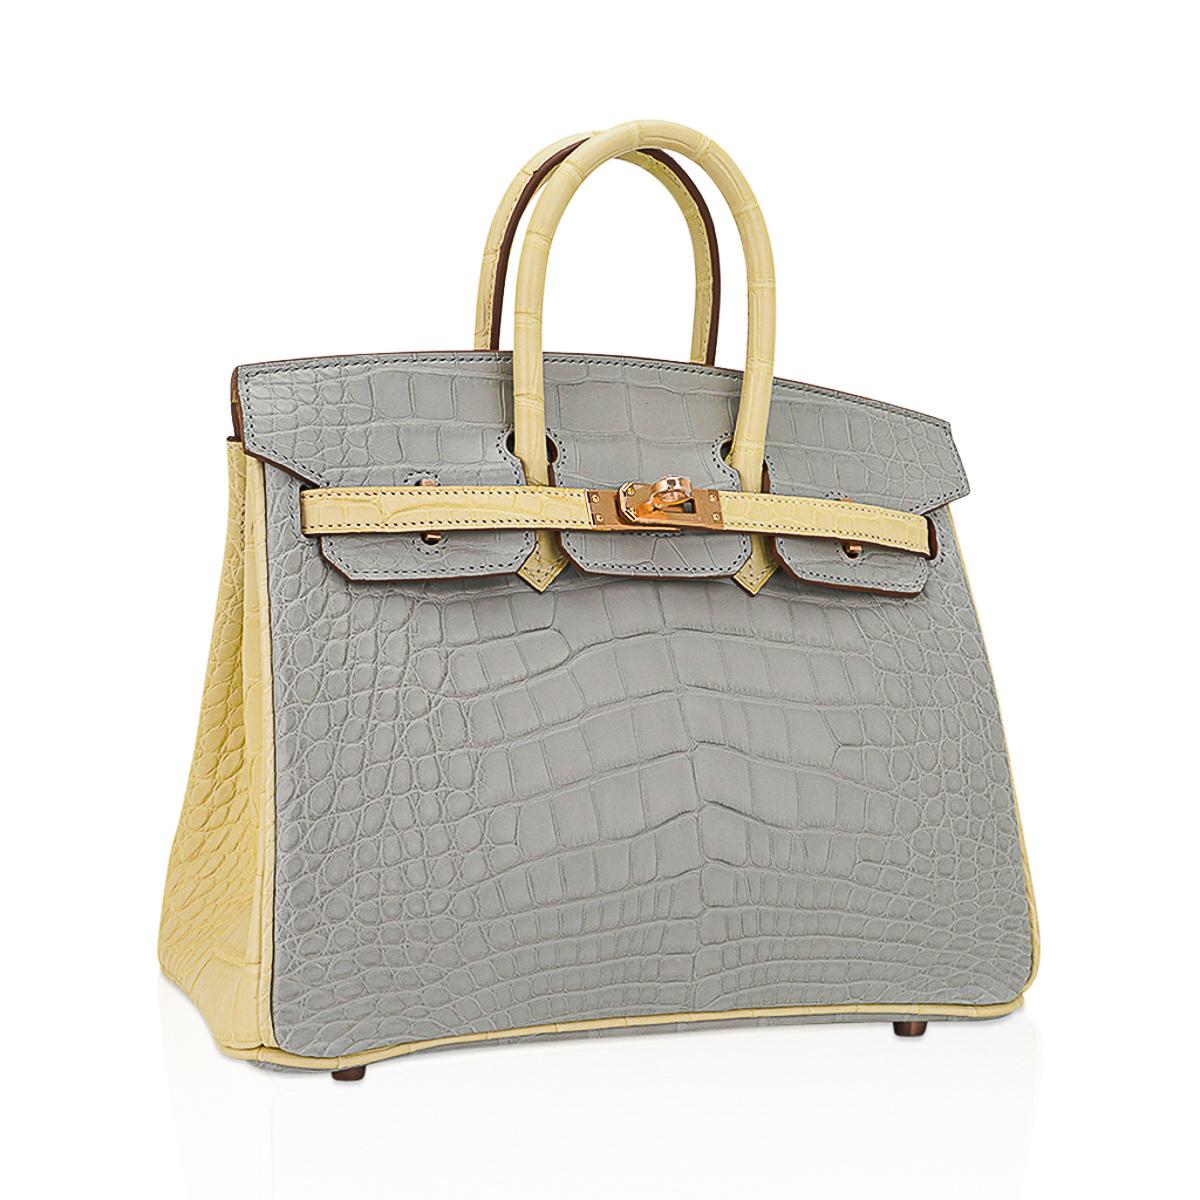 Mightychic offers an Hermes Birkin 25 HSS bag featured in Gris Pearl and Vanille.
This gorgeous Hermes Special Order Birkin in the soft neutral colours is enhanced by the matte Alligator.
Sophisticated colour combination with Rose Gold